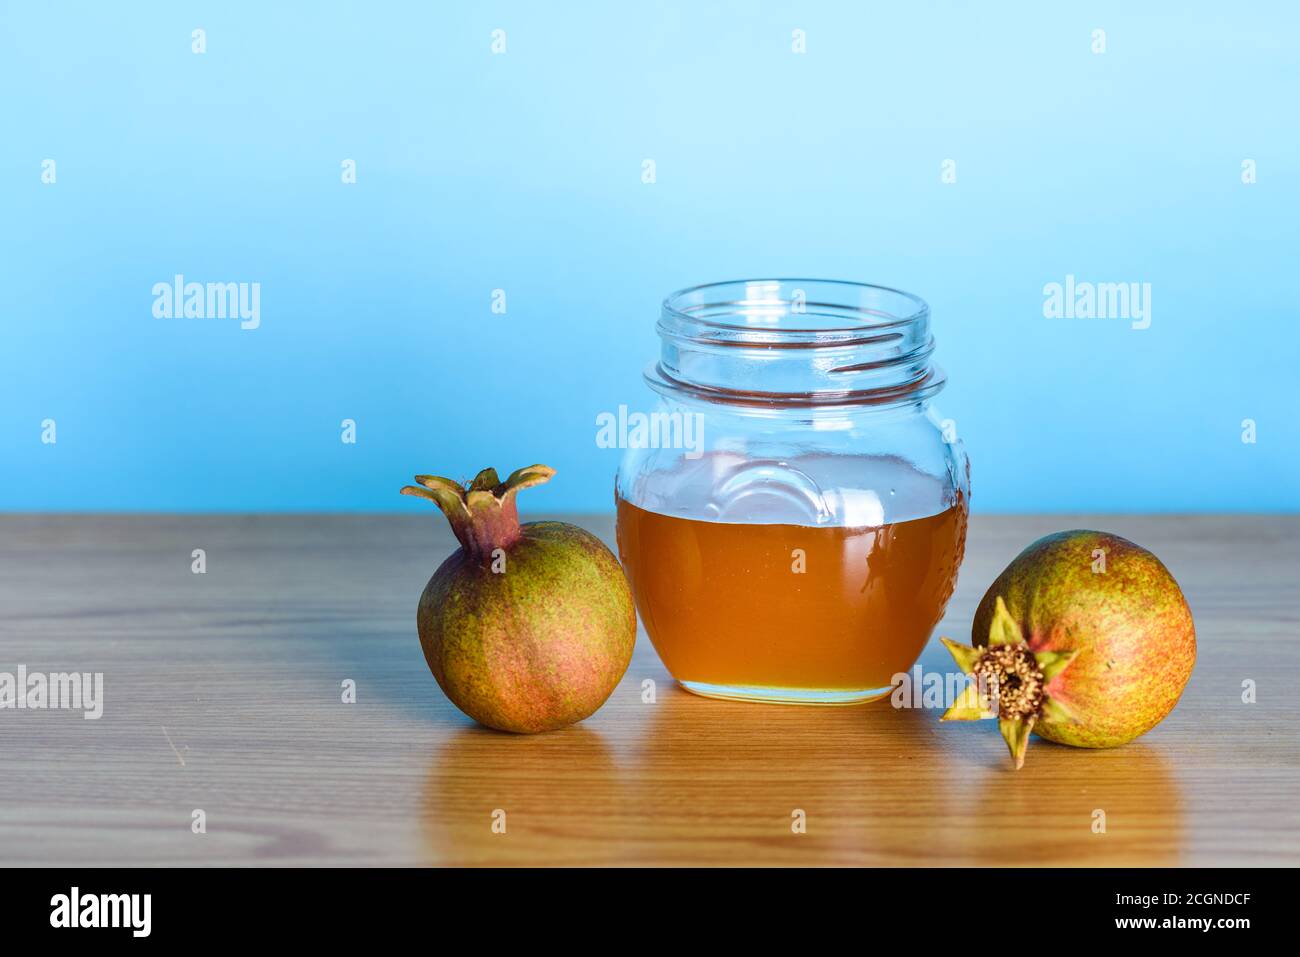 Rosh Ha Shana - Jewish new year composition of pomegranate and jar of honey for Rosh Hashanah on wooden table over blue background.Greeting card with copy space. Stock Photo